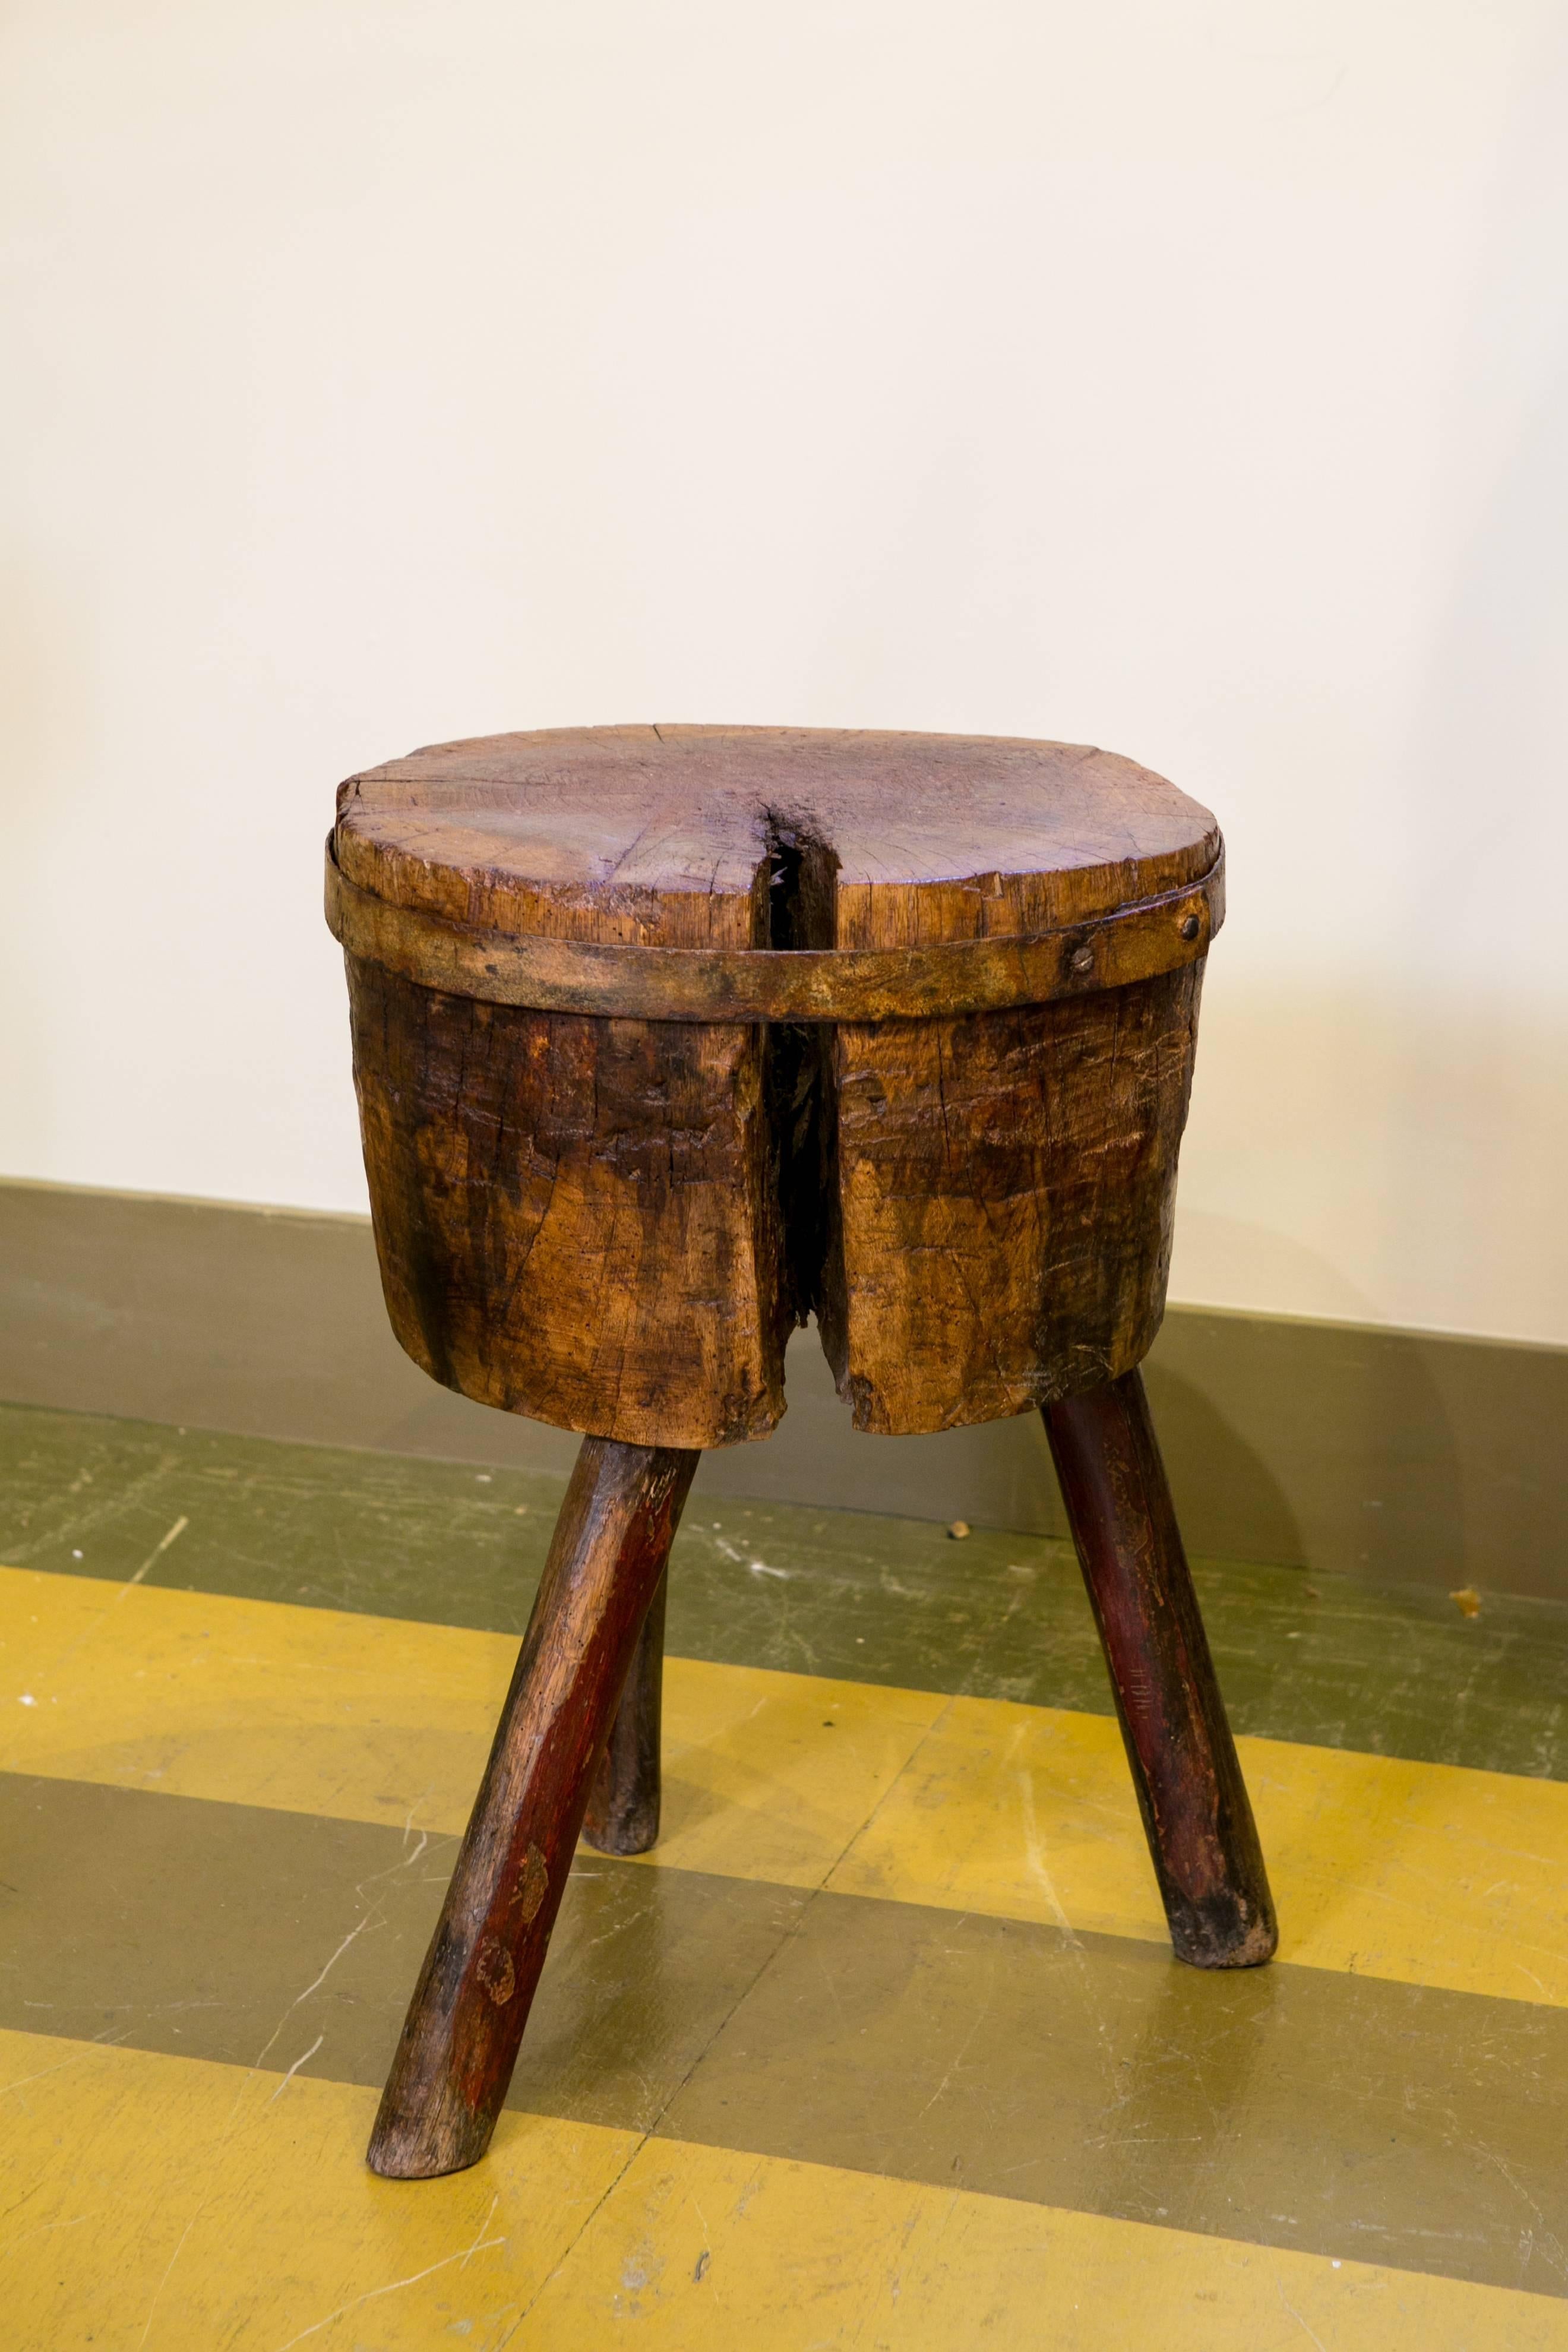 Charming butcher block with three splay legs and iron band at top. From France, circa 1900. All original, handcrafted. Would make a great side table. Diameter listed is for the leg base. Top measures approximately 18.5 inches wide by 16 inches deep.